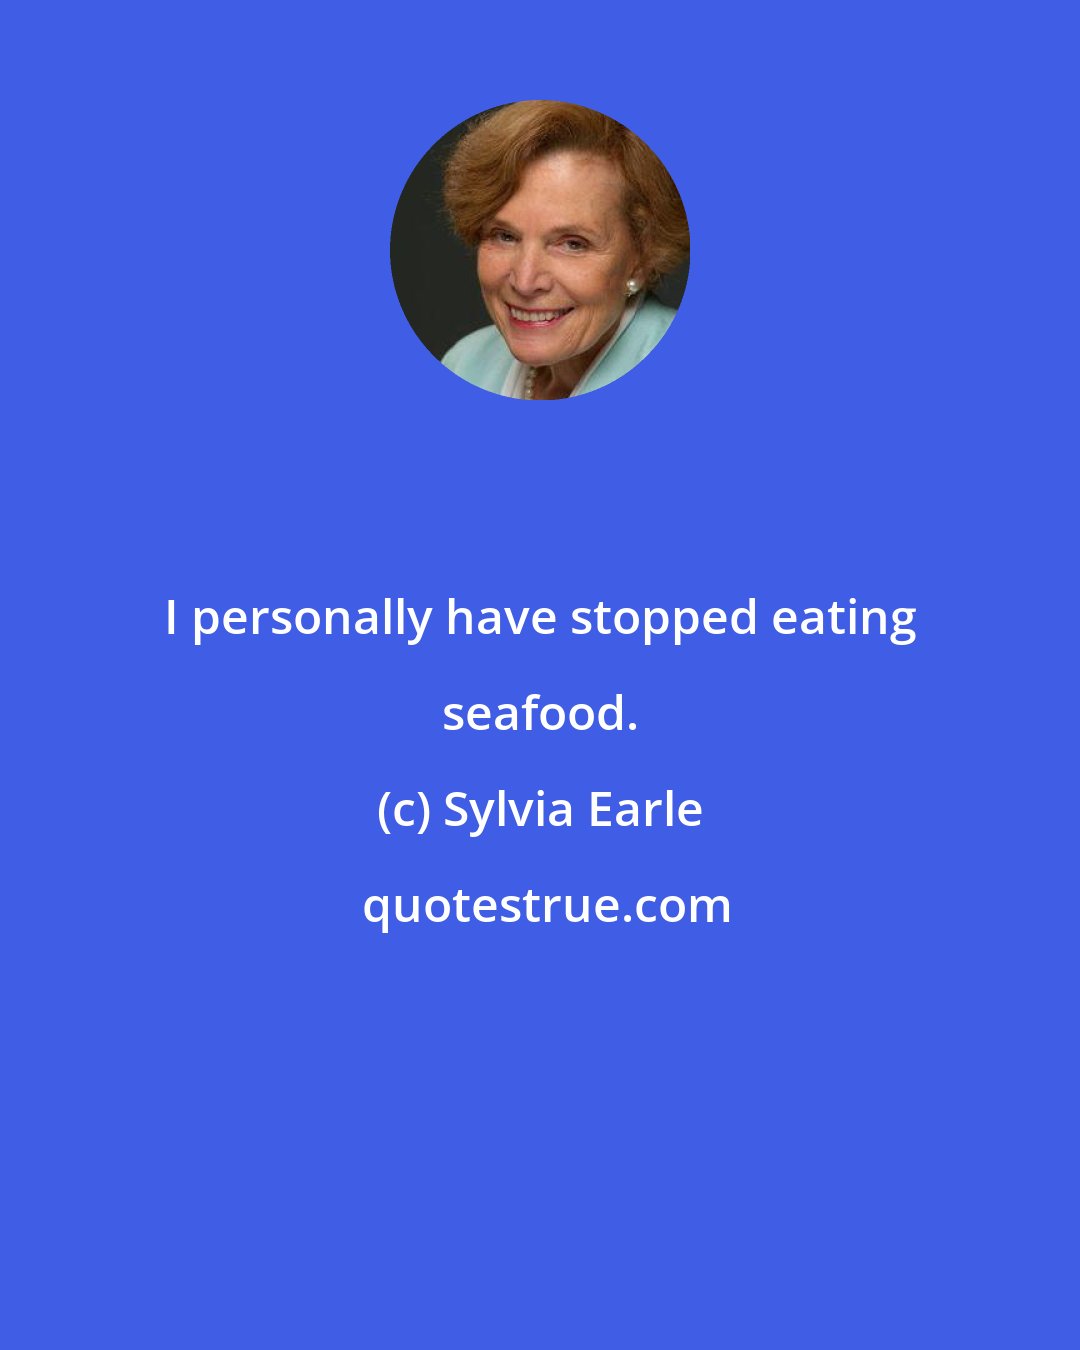 Sylvia Earle: I personally have stopped eating seafood.